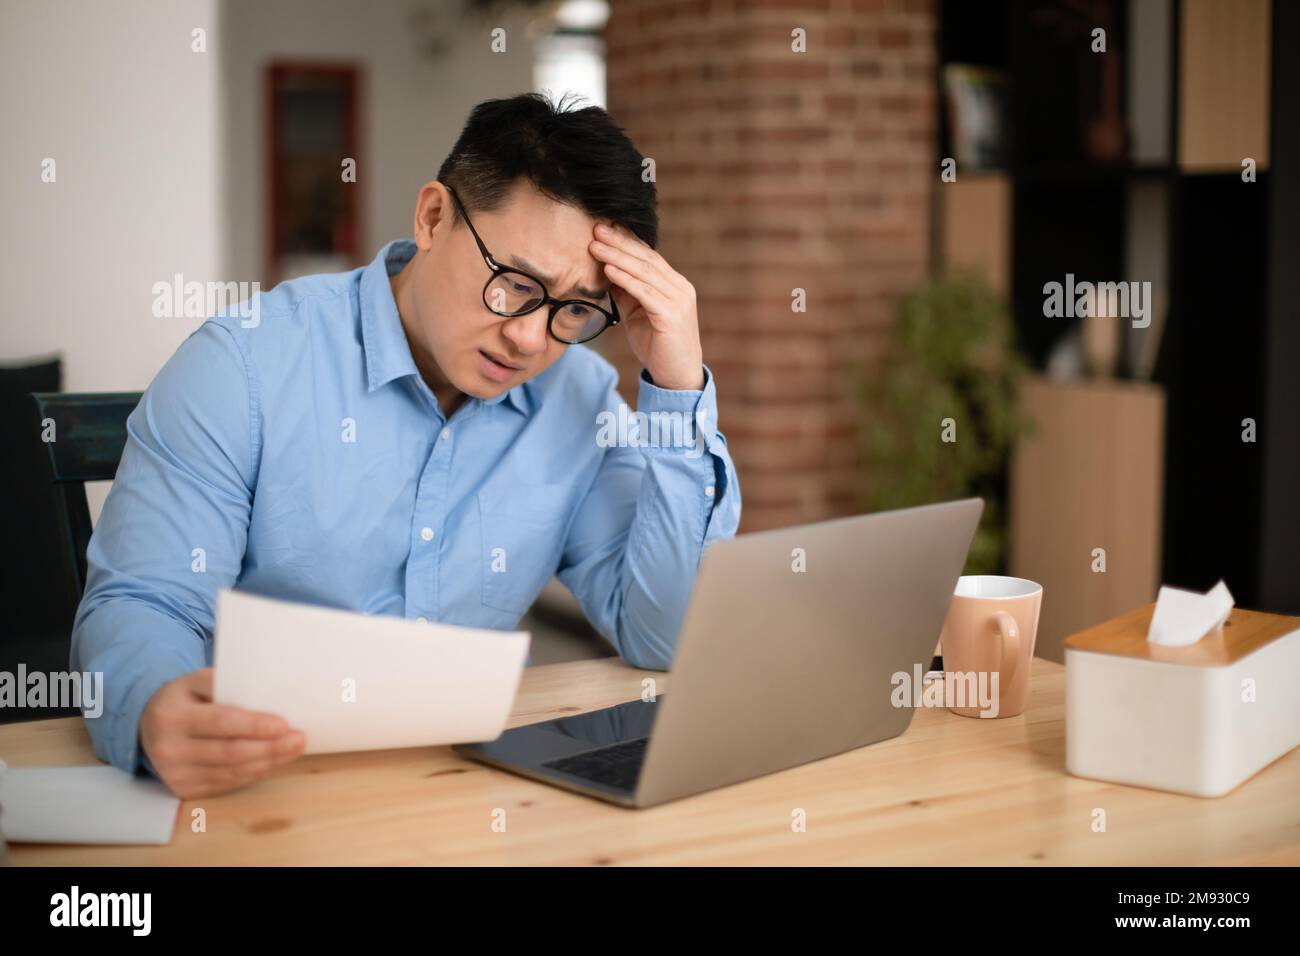 Stressed middle aged asian businessman holding papers, reading bills or tax form, having financial problem Stock Photo